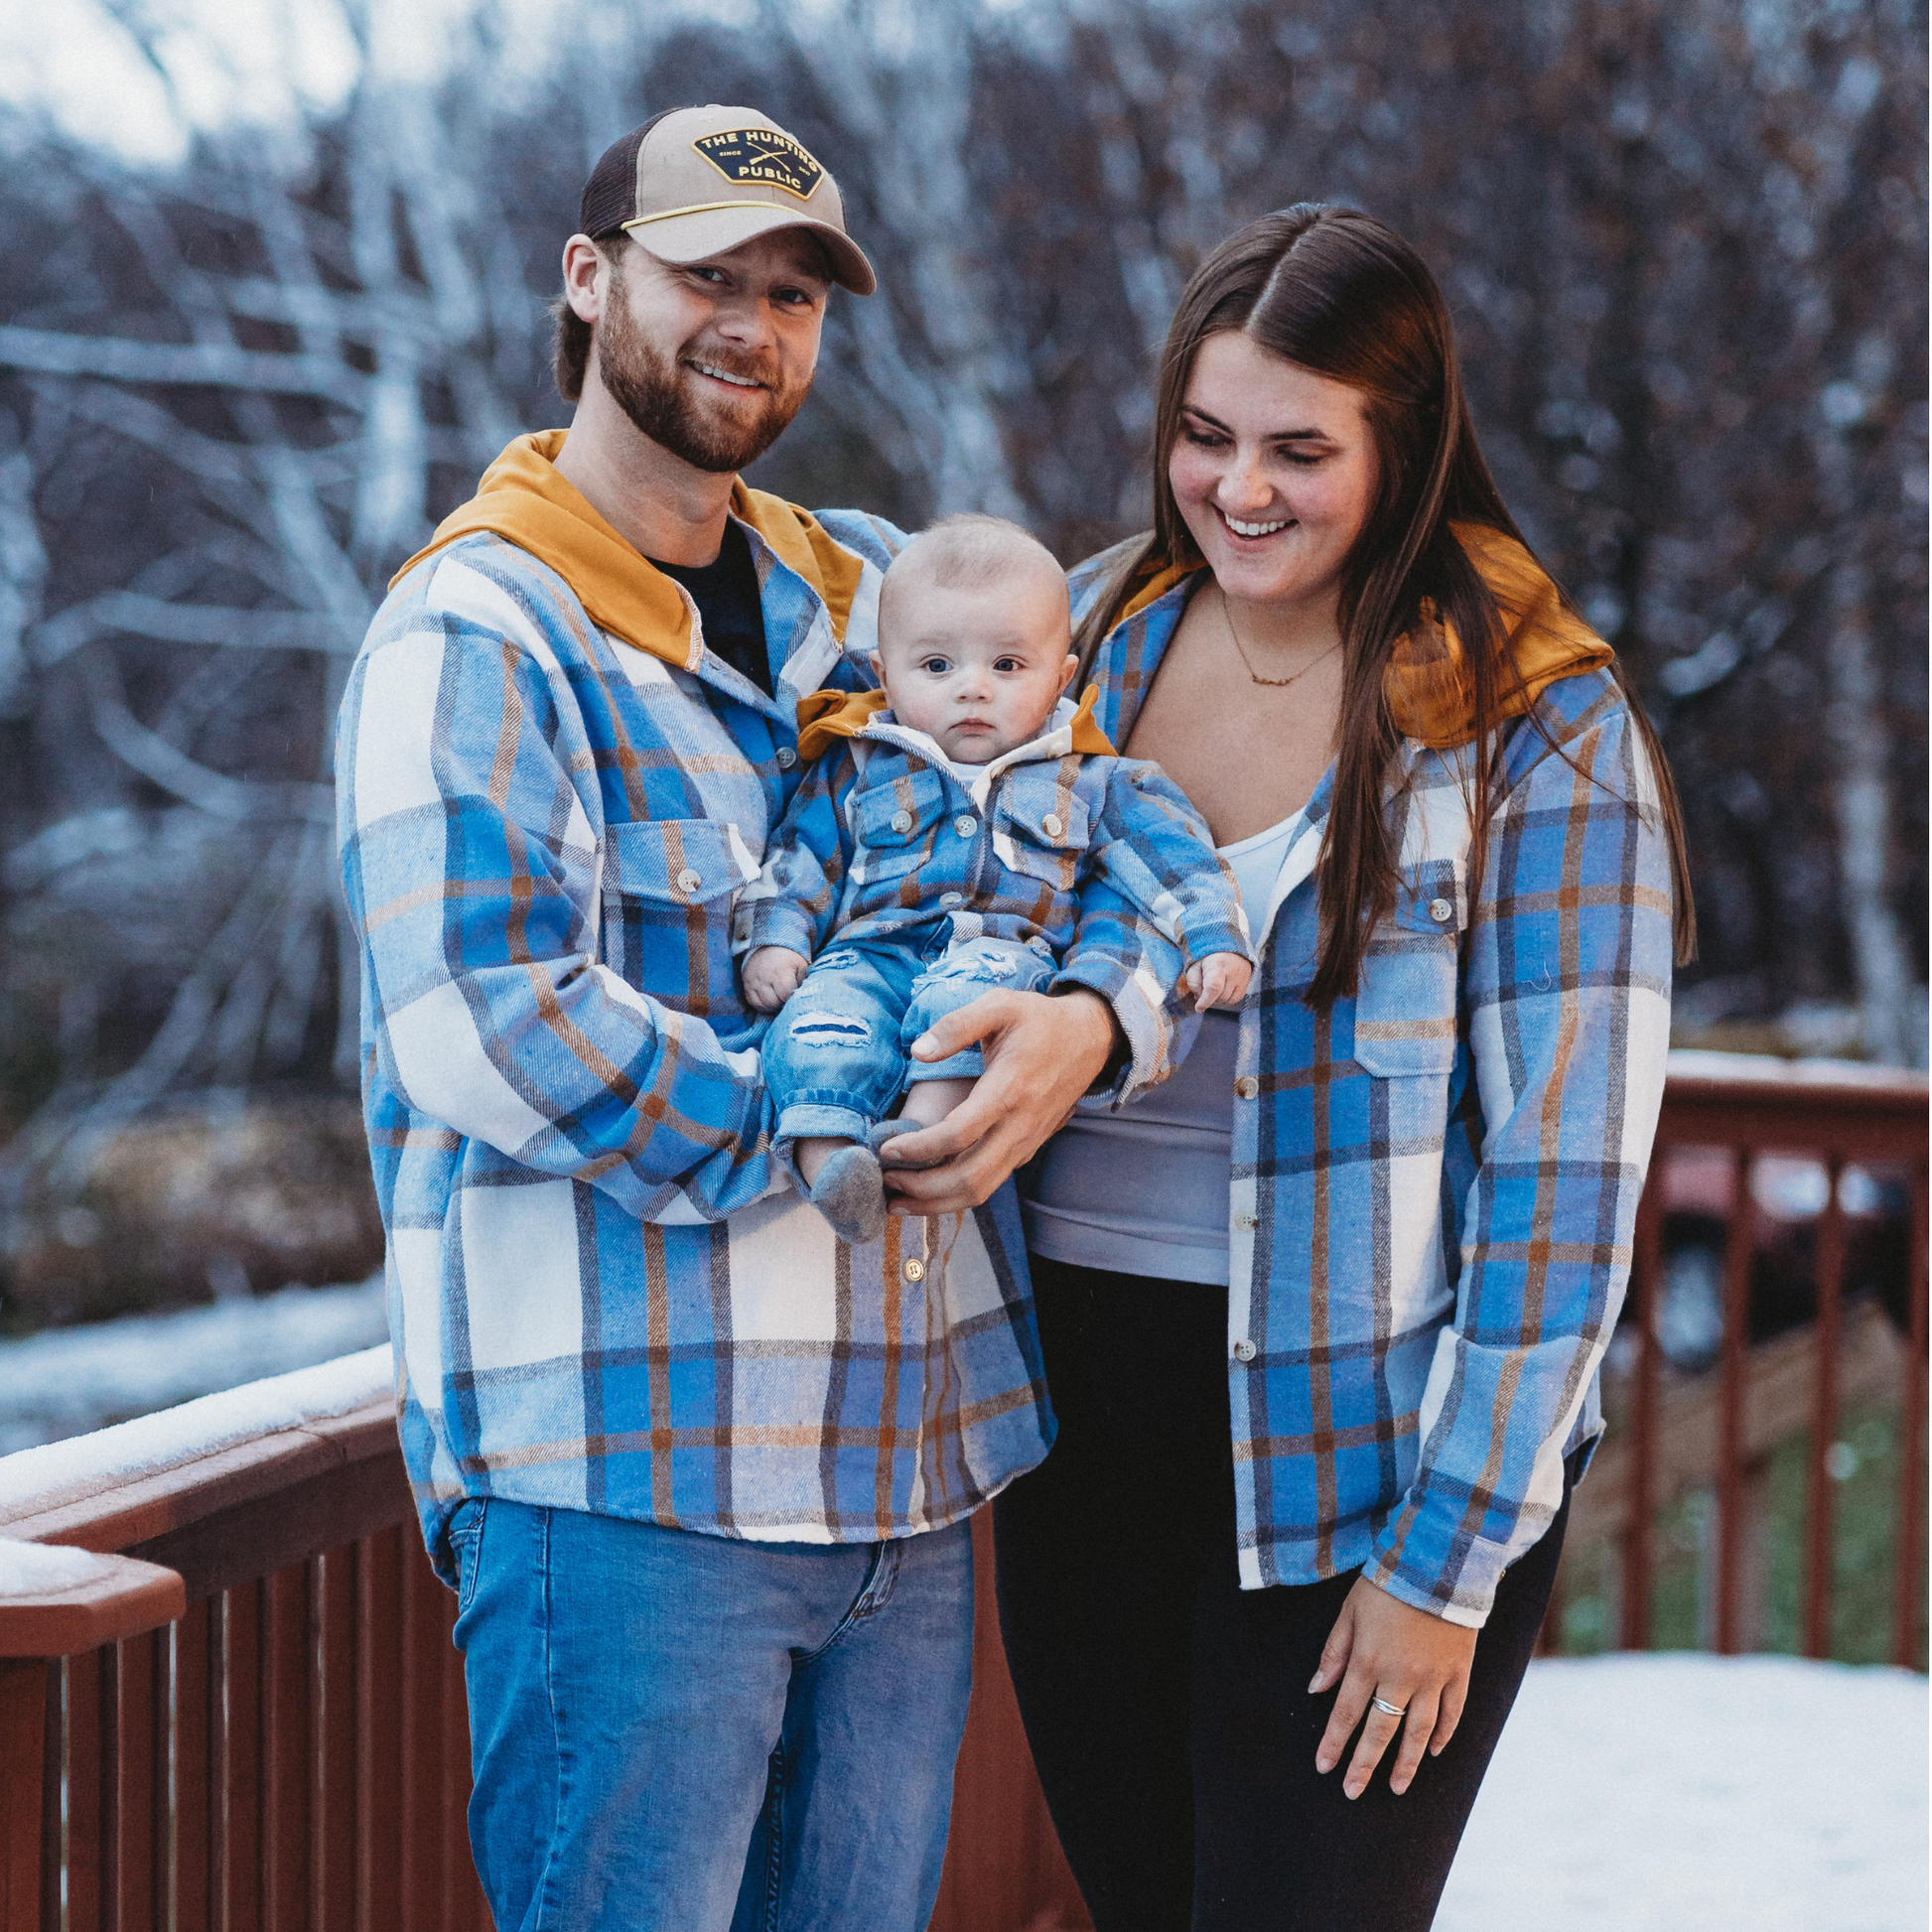 Hooded Blue & Yellow Flannel Jacket- Child